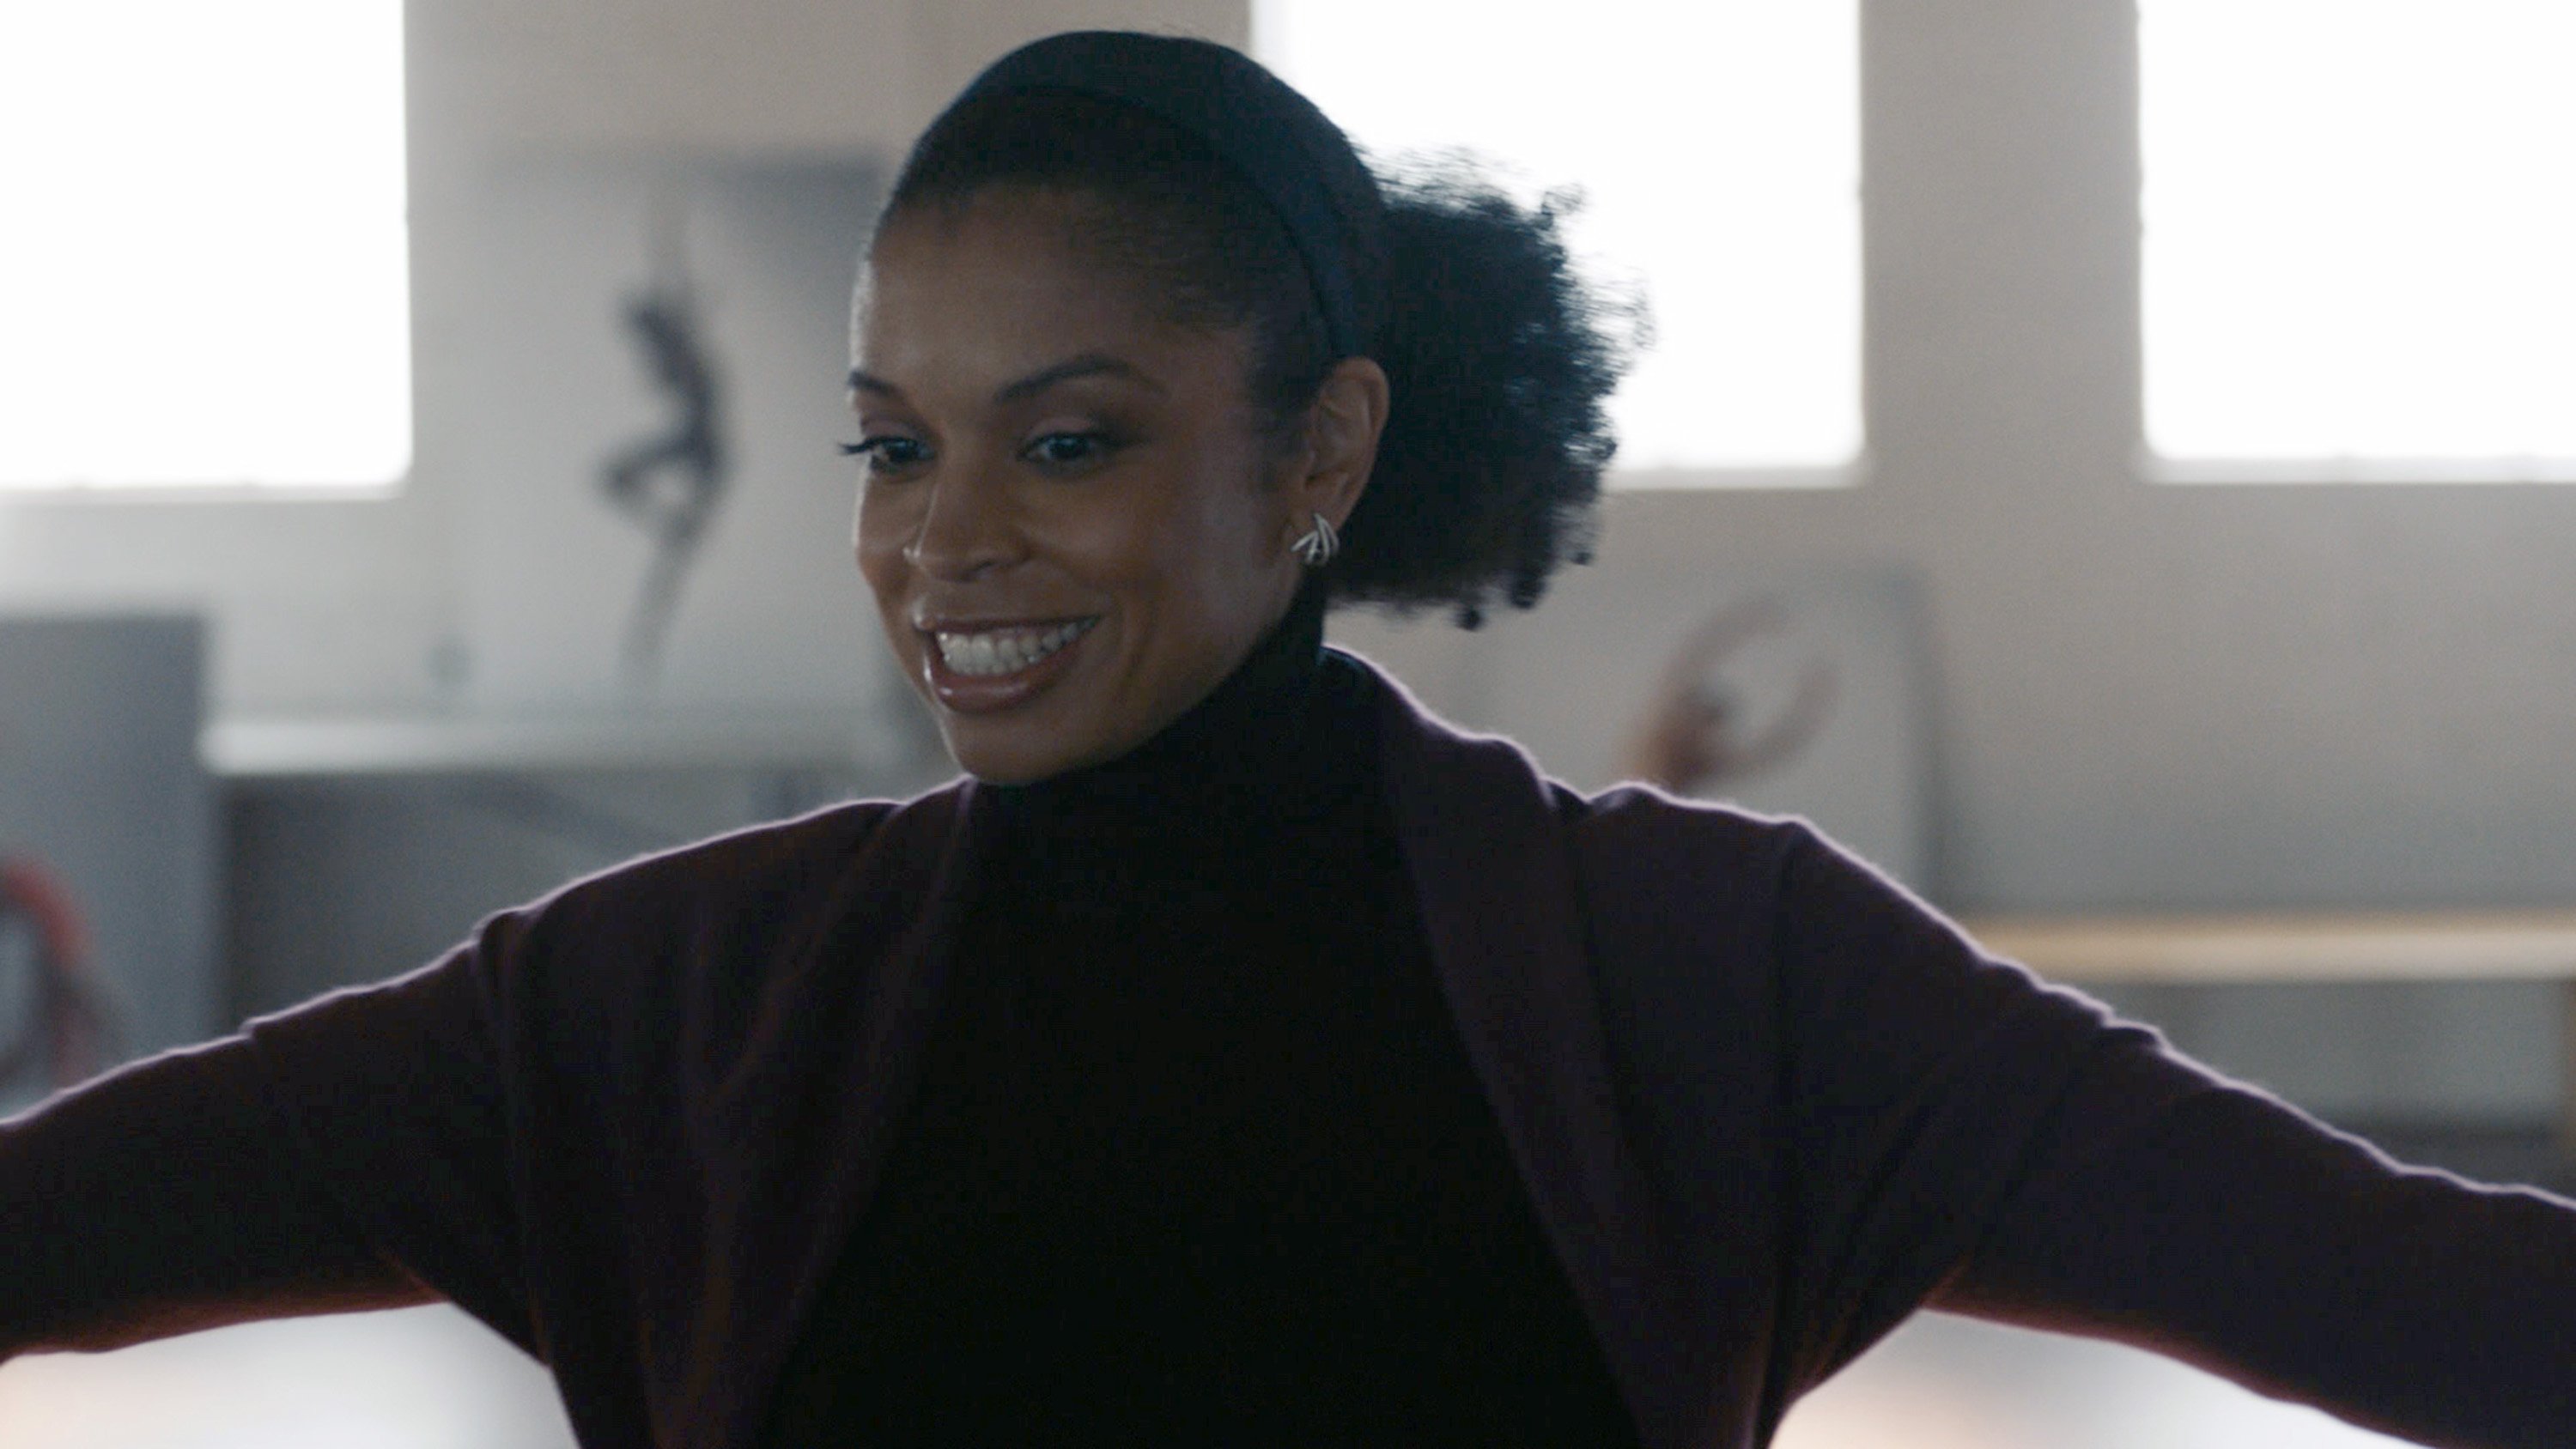 Susan Kelechi Watson as Beth on 'This Is Us' smiling and stretching out her arms during a scene.